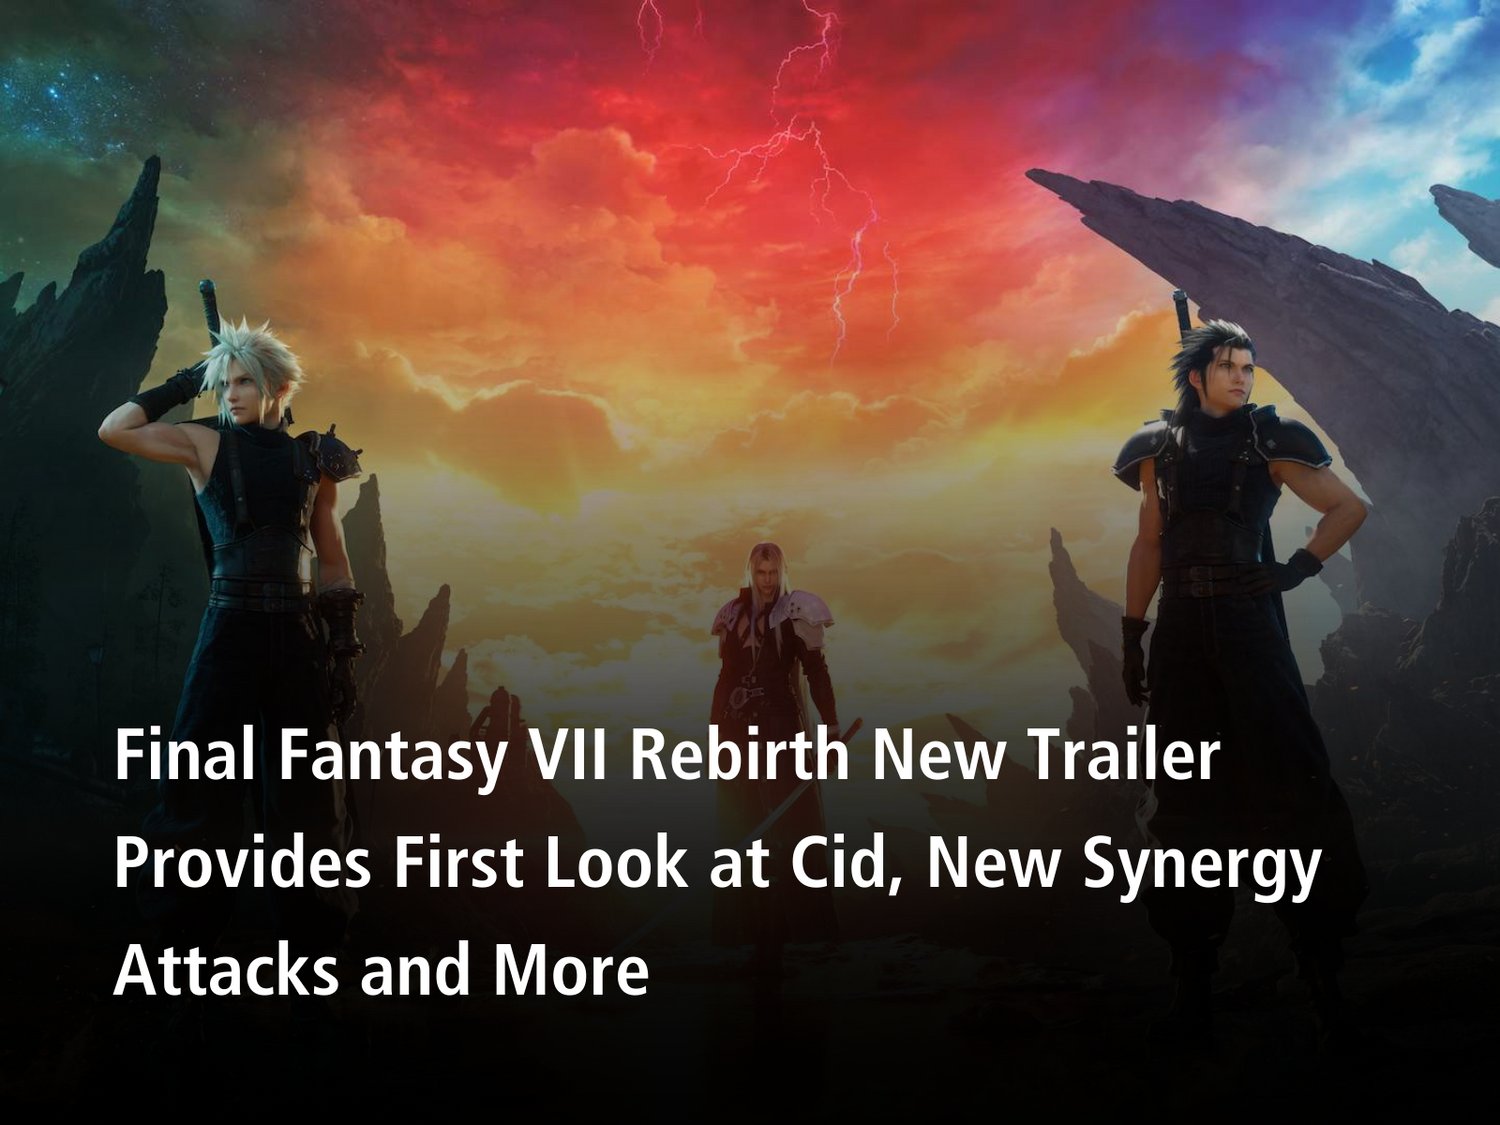 FINAL FANTASY VII REBIRTH information, release date and more